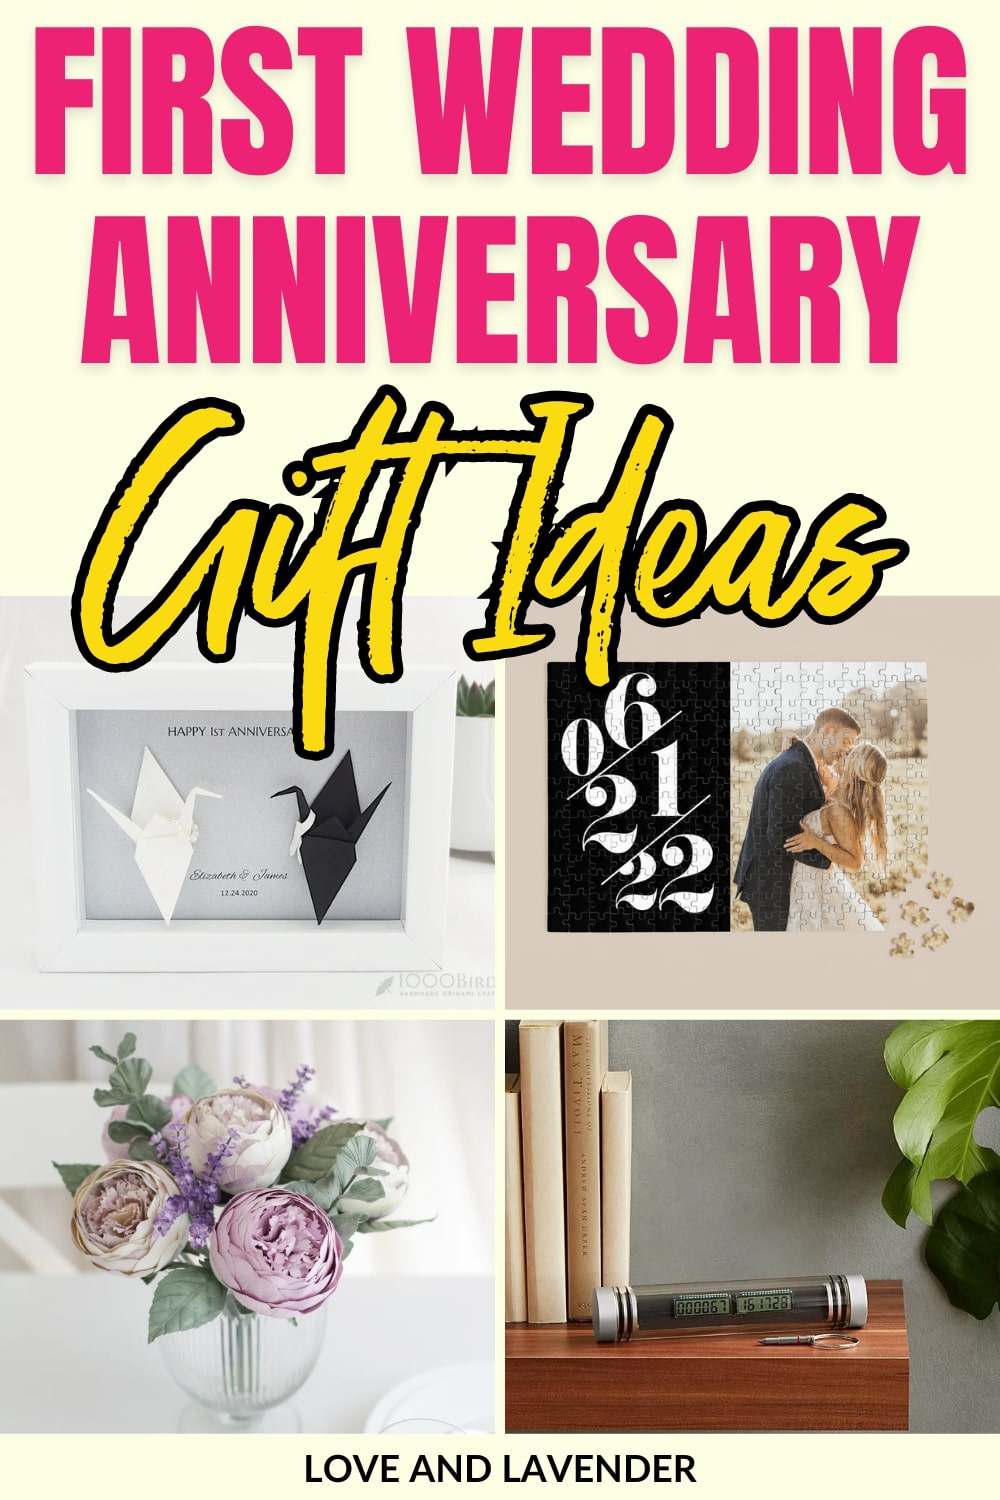 One year down and a lifetime to go! Congrats on making it through your first year of marriage. If you're stuck on what to get your spouse for your first anniversary, check out this list of thoughtful and budget-friendly gift ideas.